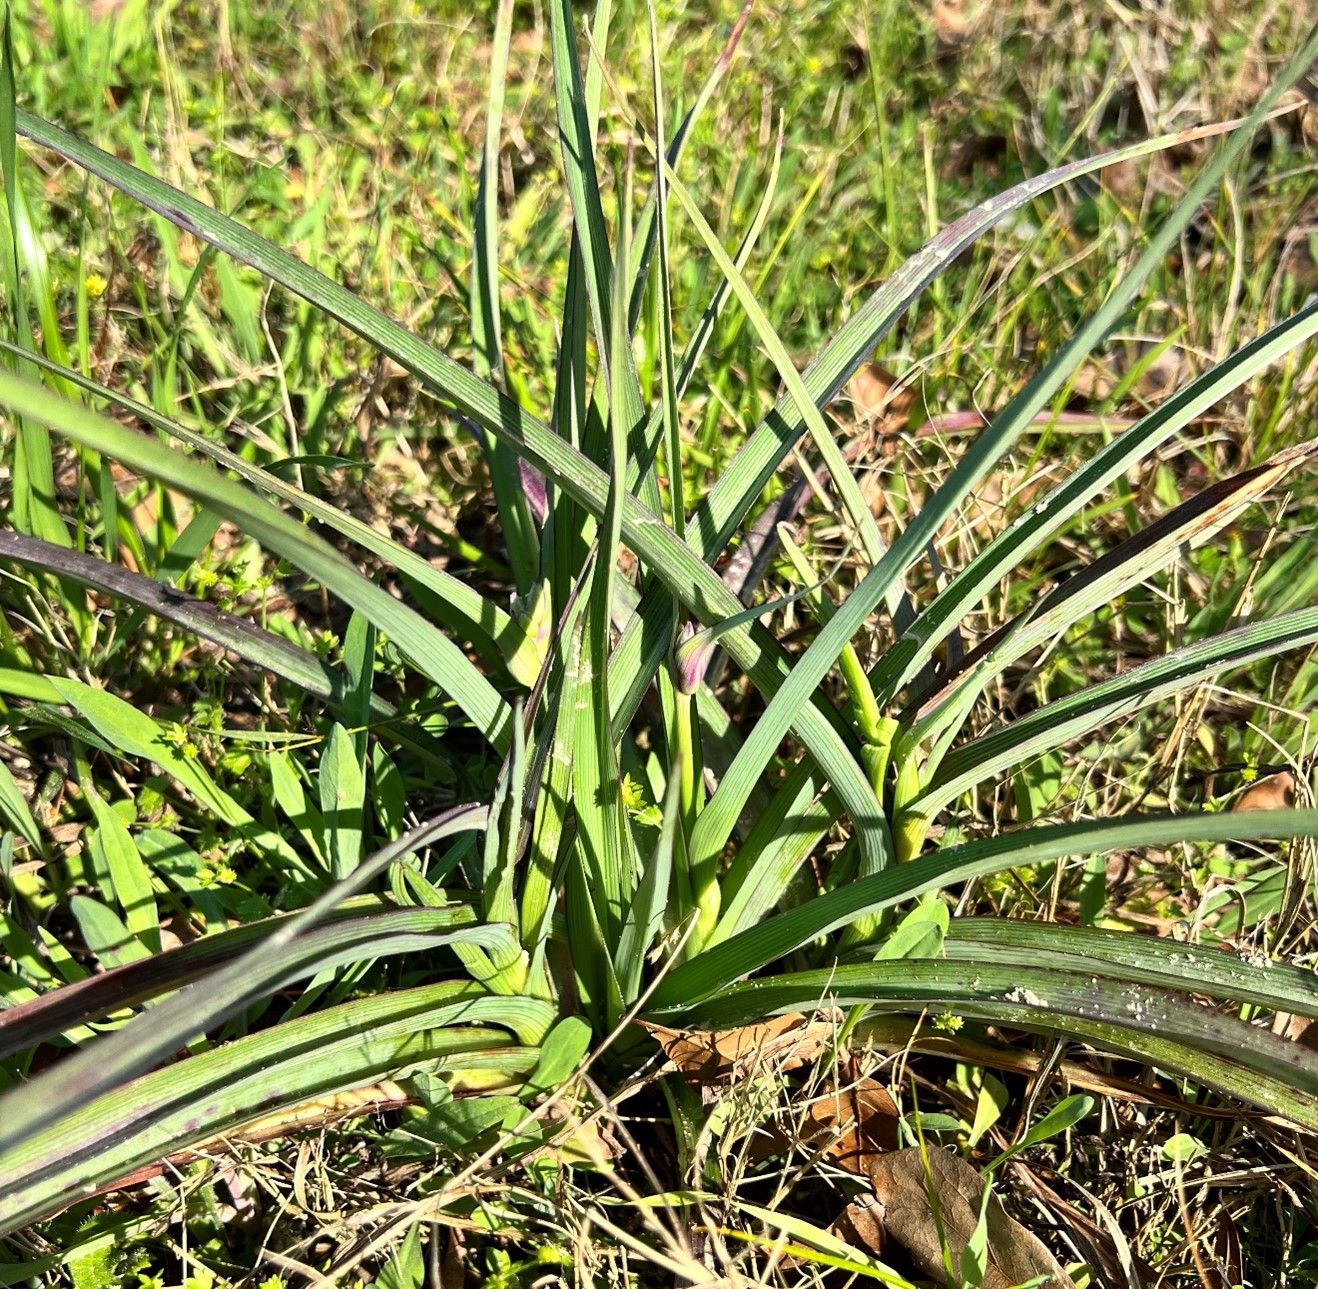 Vegetative stage of spiderwort can be identified by its long grass like leaves and fleshy stem.